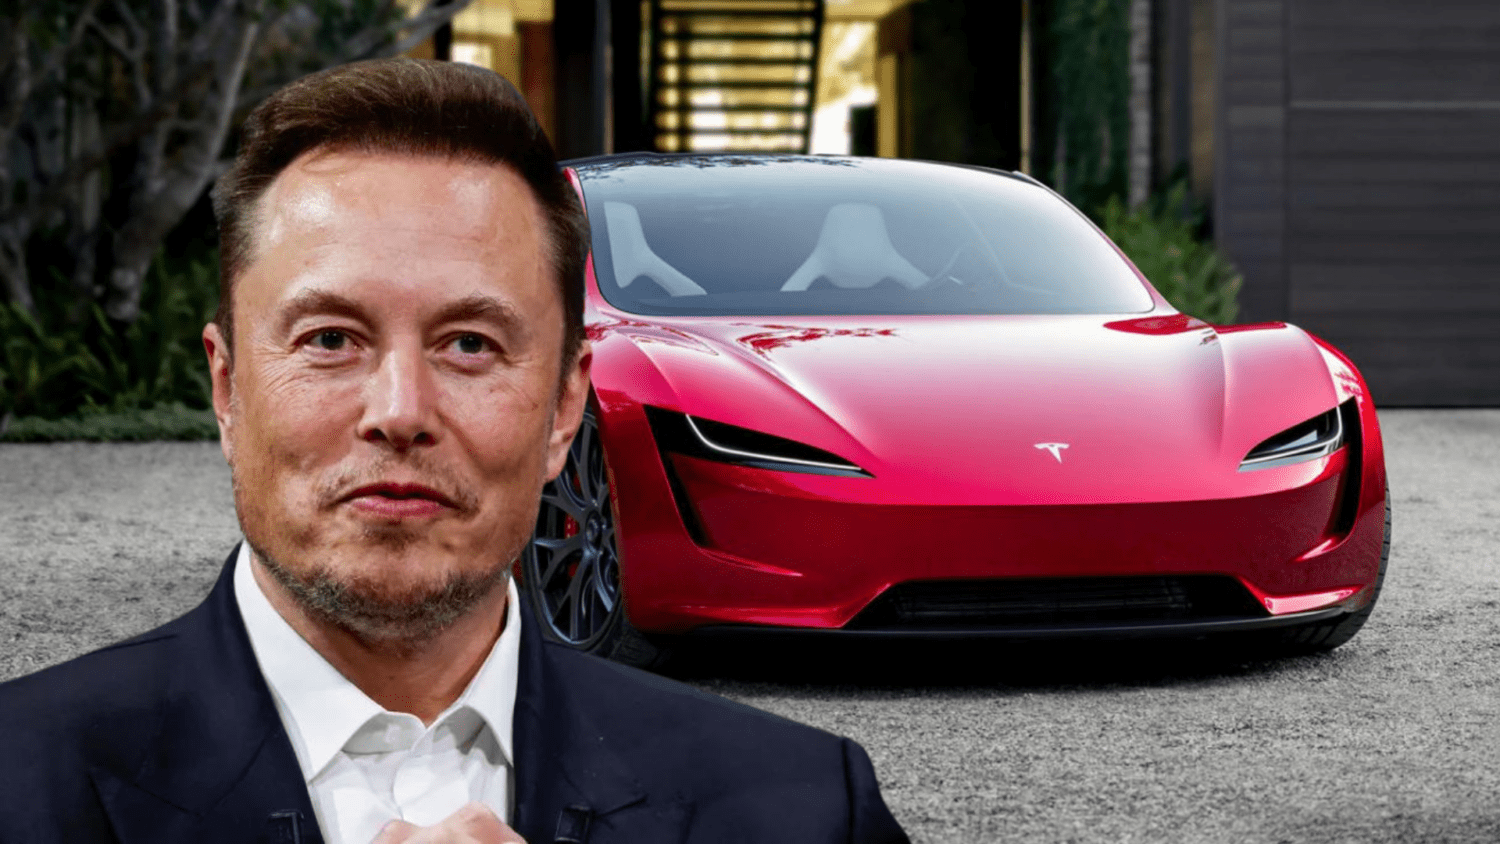 Musk recently unveiled ambitious plans for the next all-electric supercar, the Roadster, set to launch later this year, produced by Tesla.